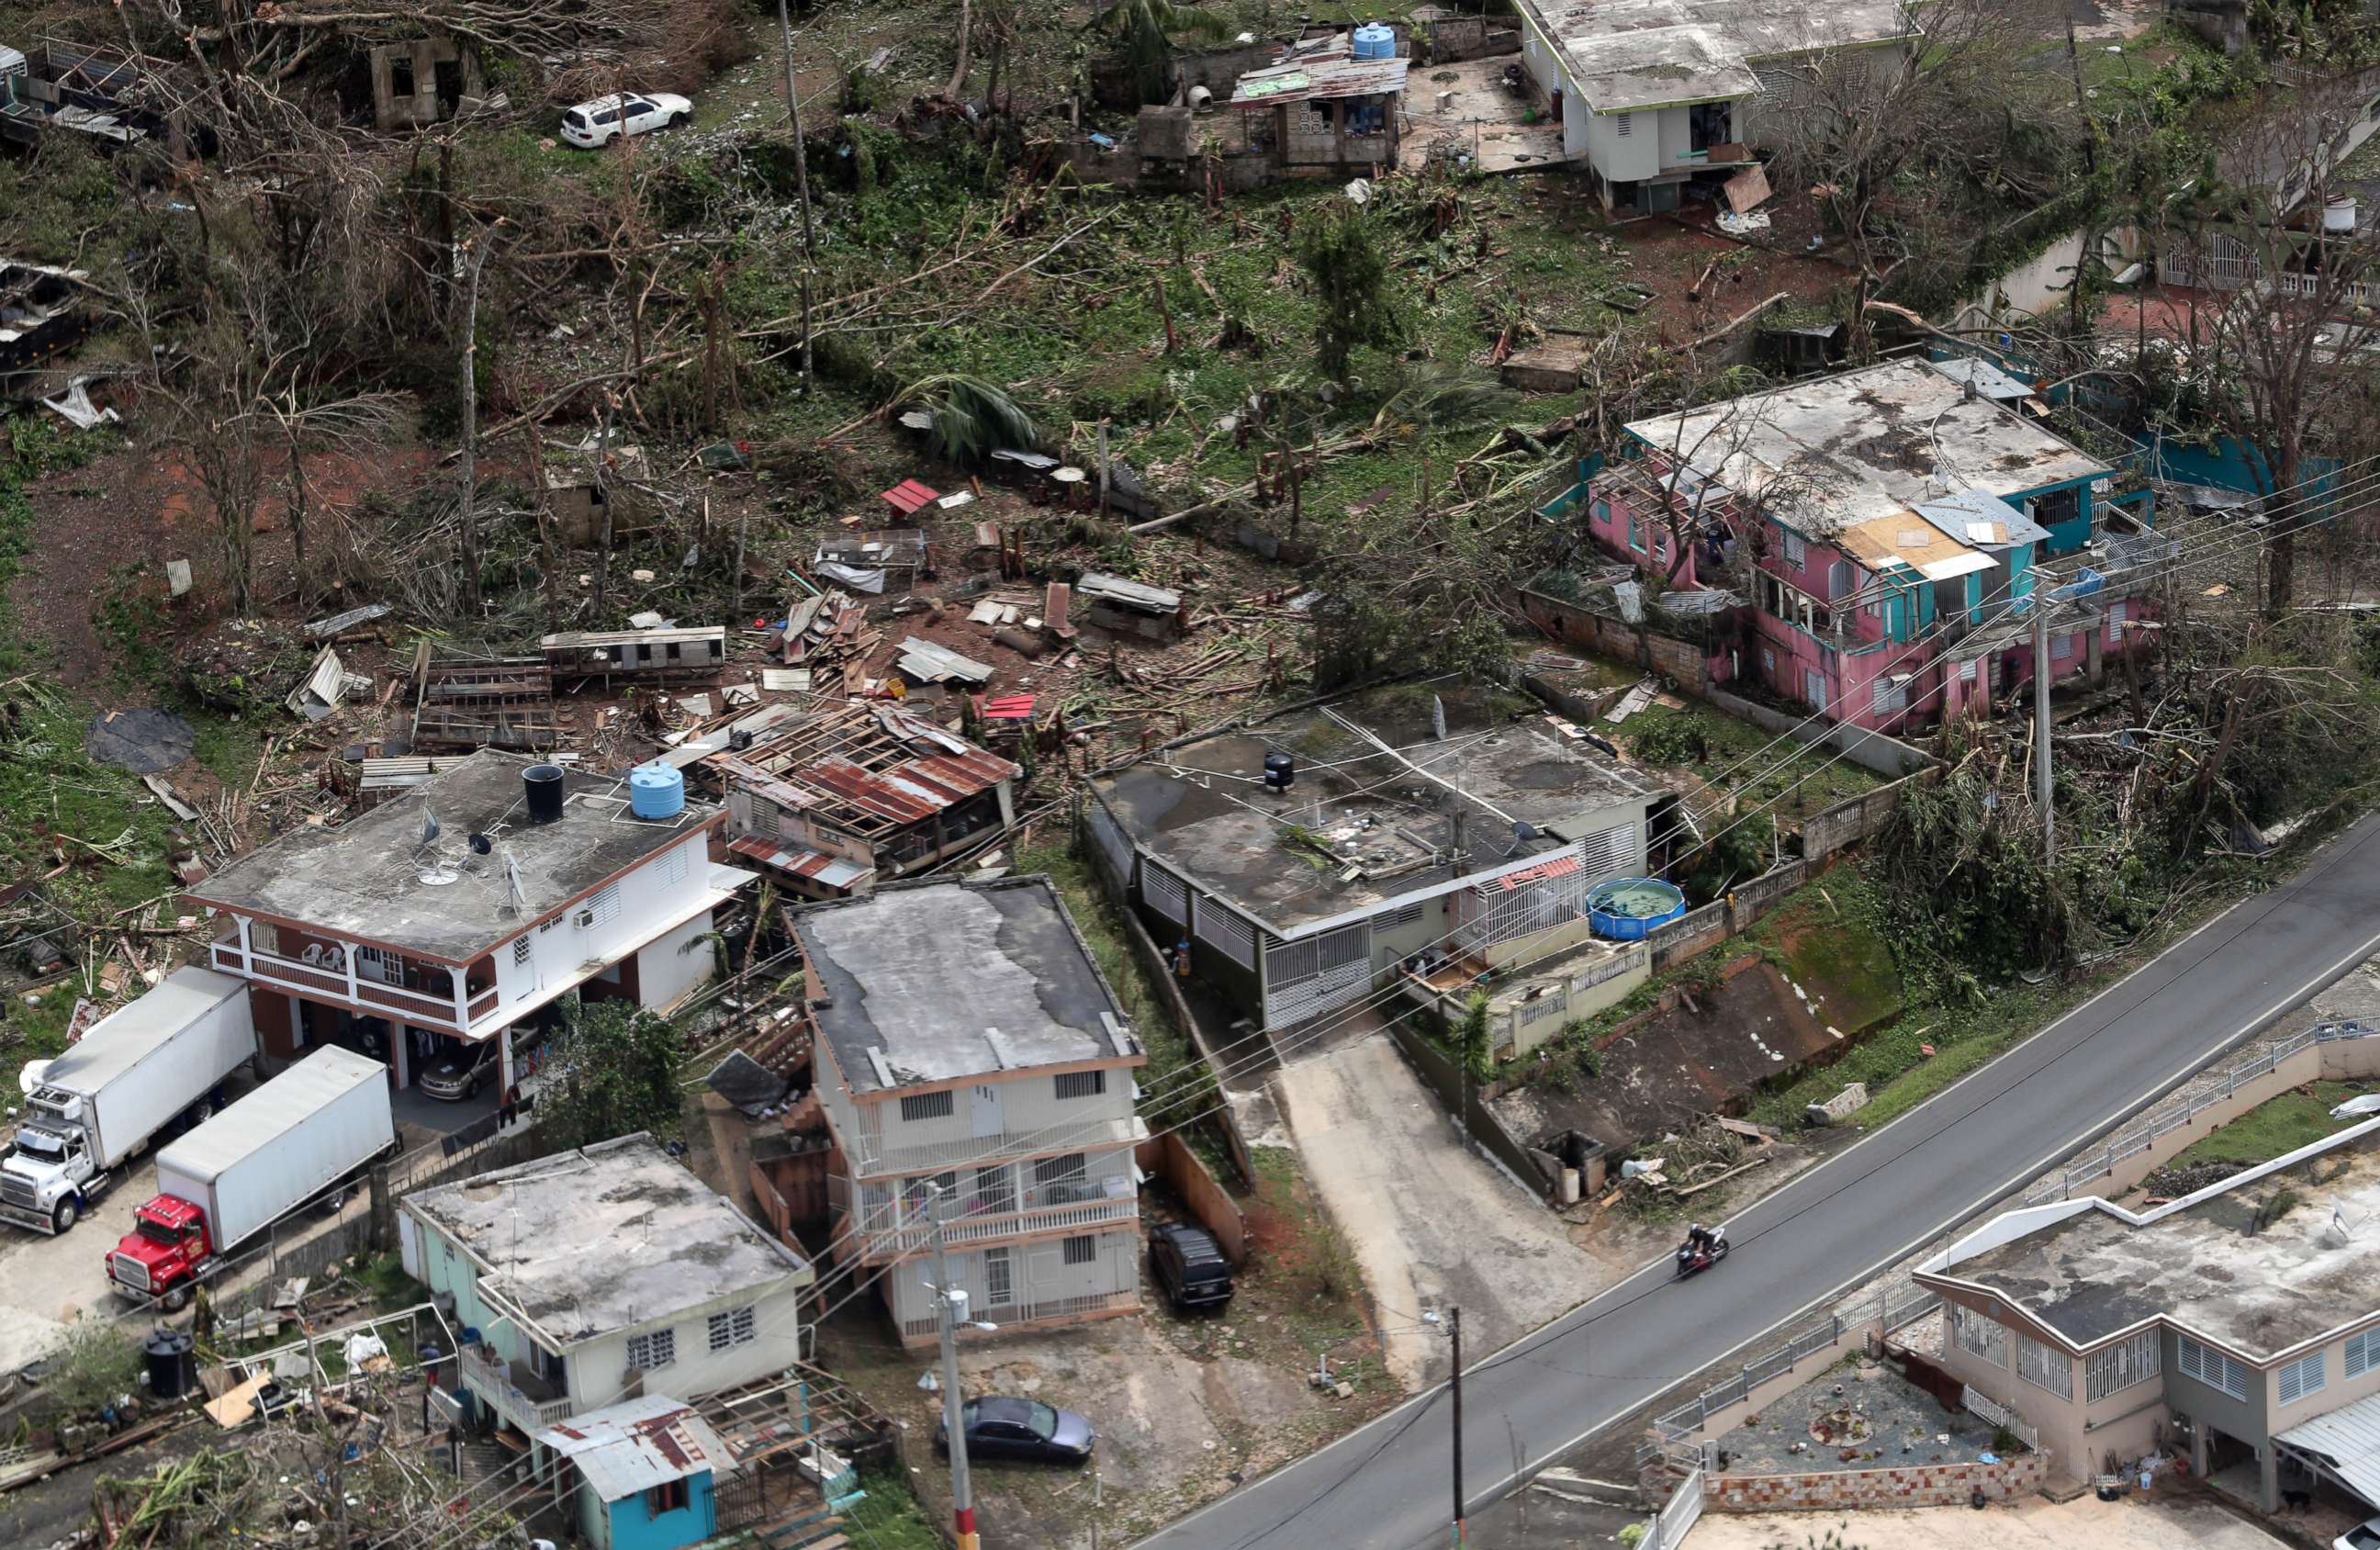 PHOTO: In this file photo, an aerial image showing the damage done to the Morovis area of Puerto Rico three days after hurricane Maria passed through the island on Sept. 20, 2017.